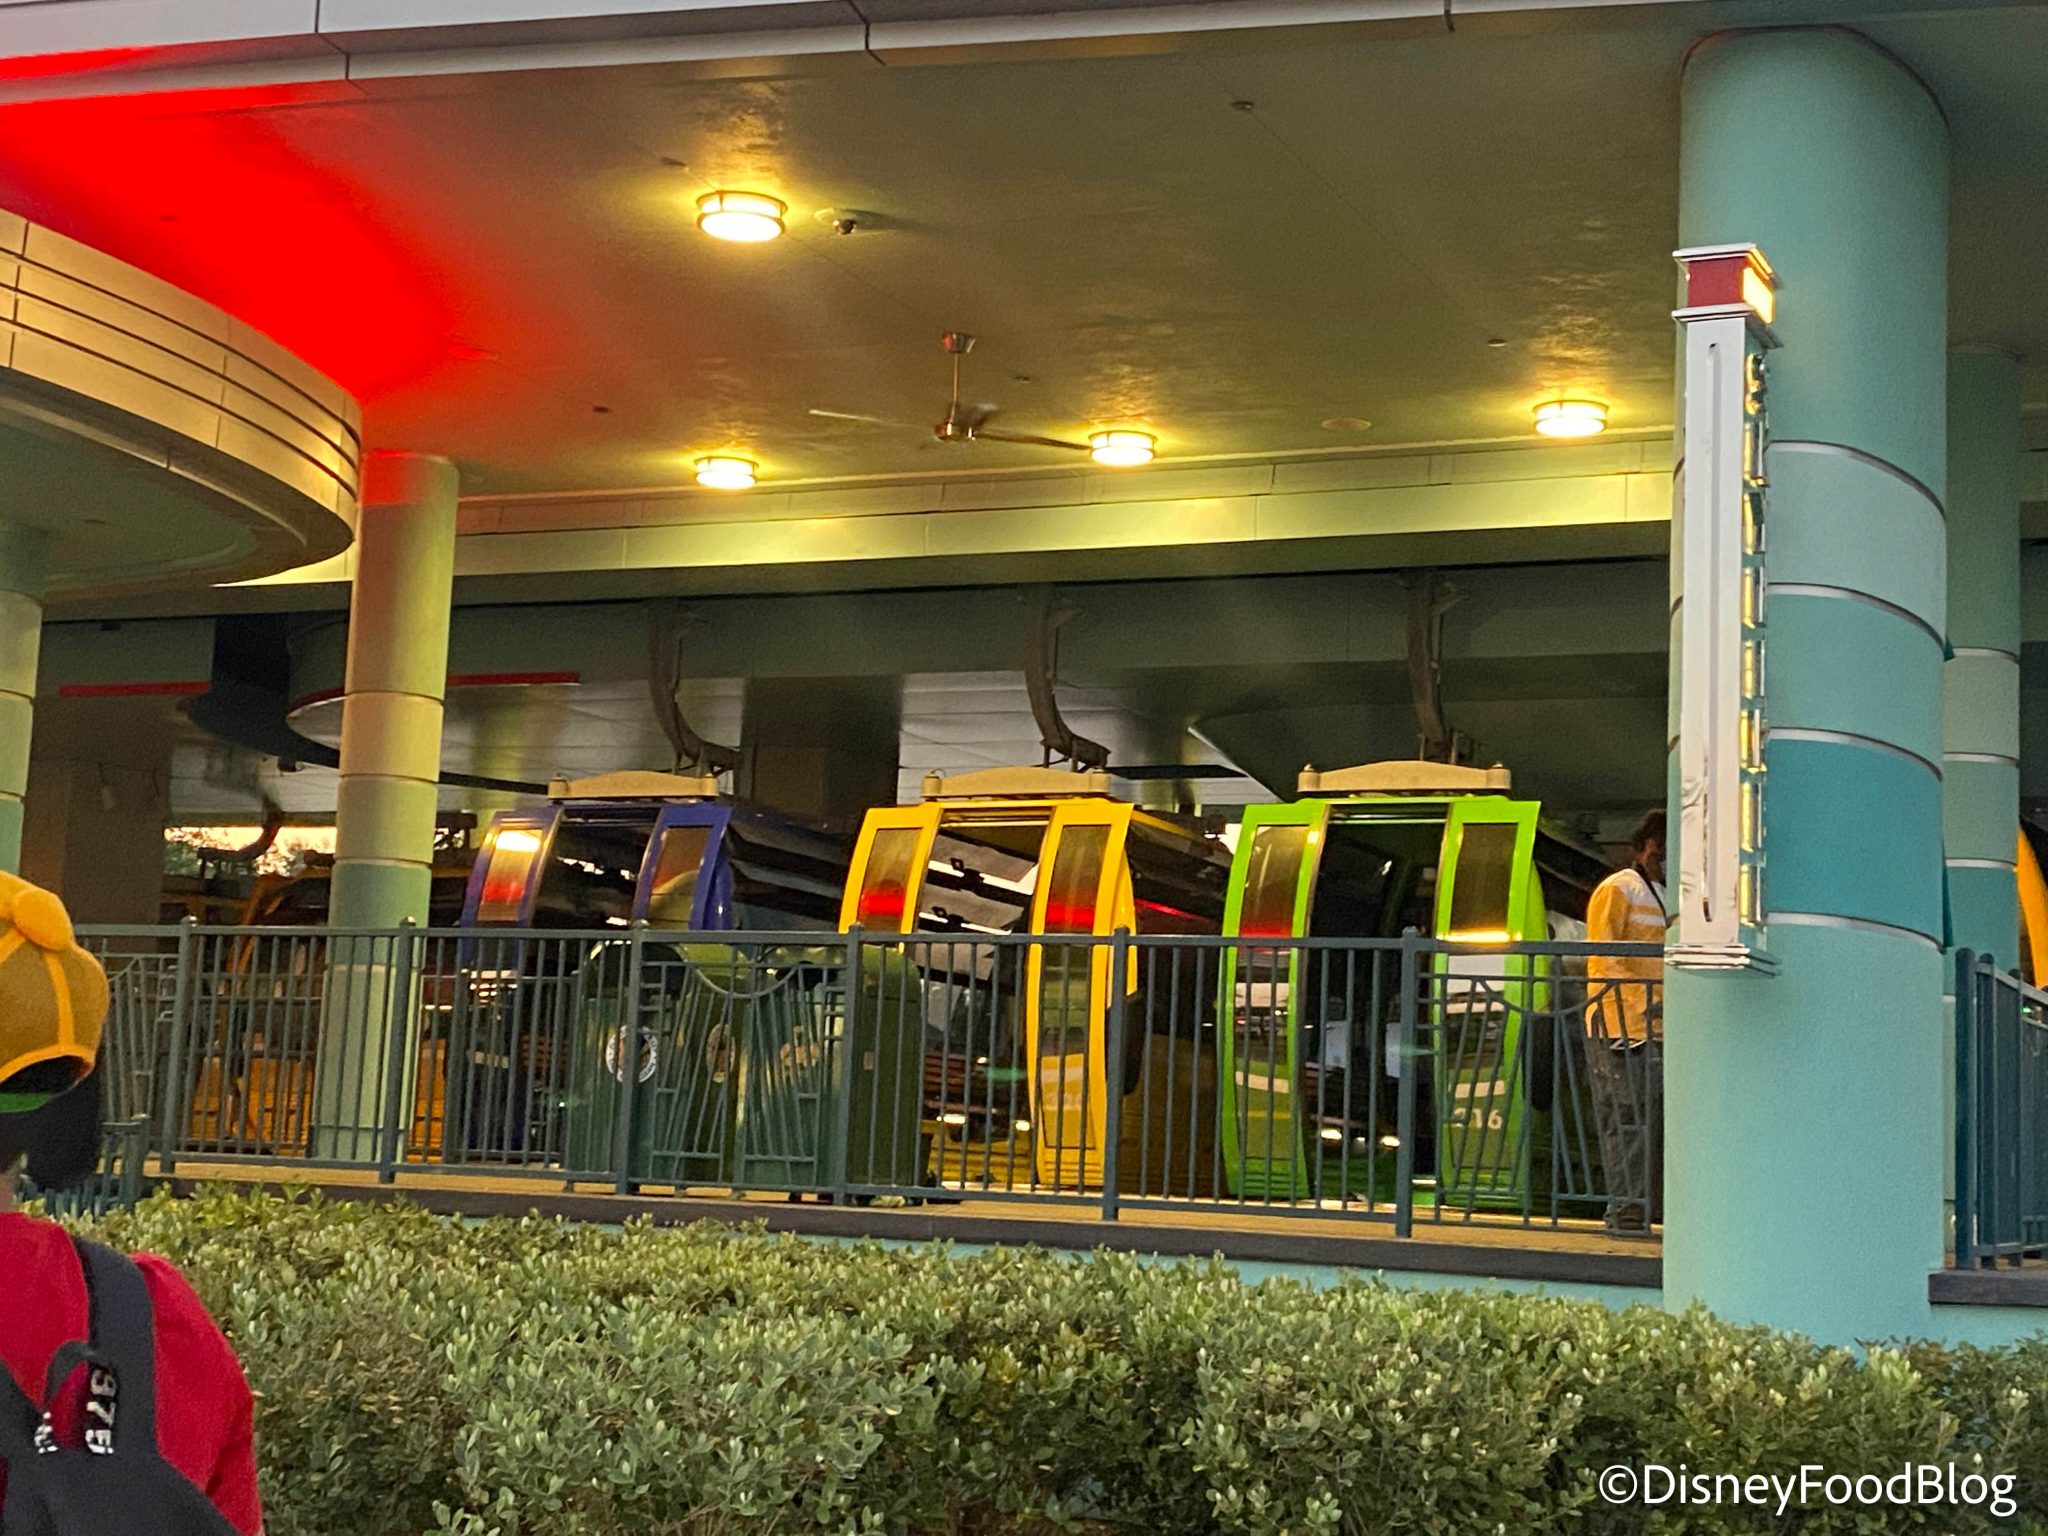 PHOTOS & VIDEOS Everything We Know About the Skyliner Crash in Disney